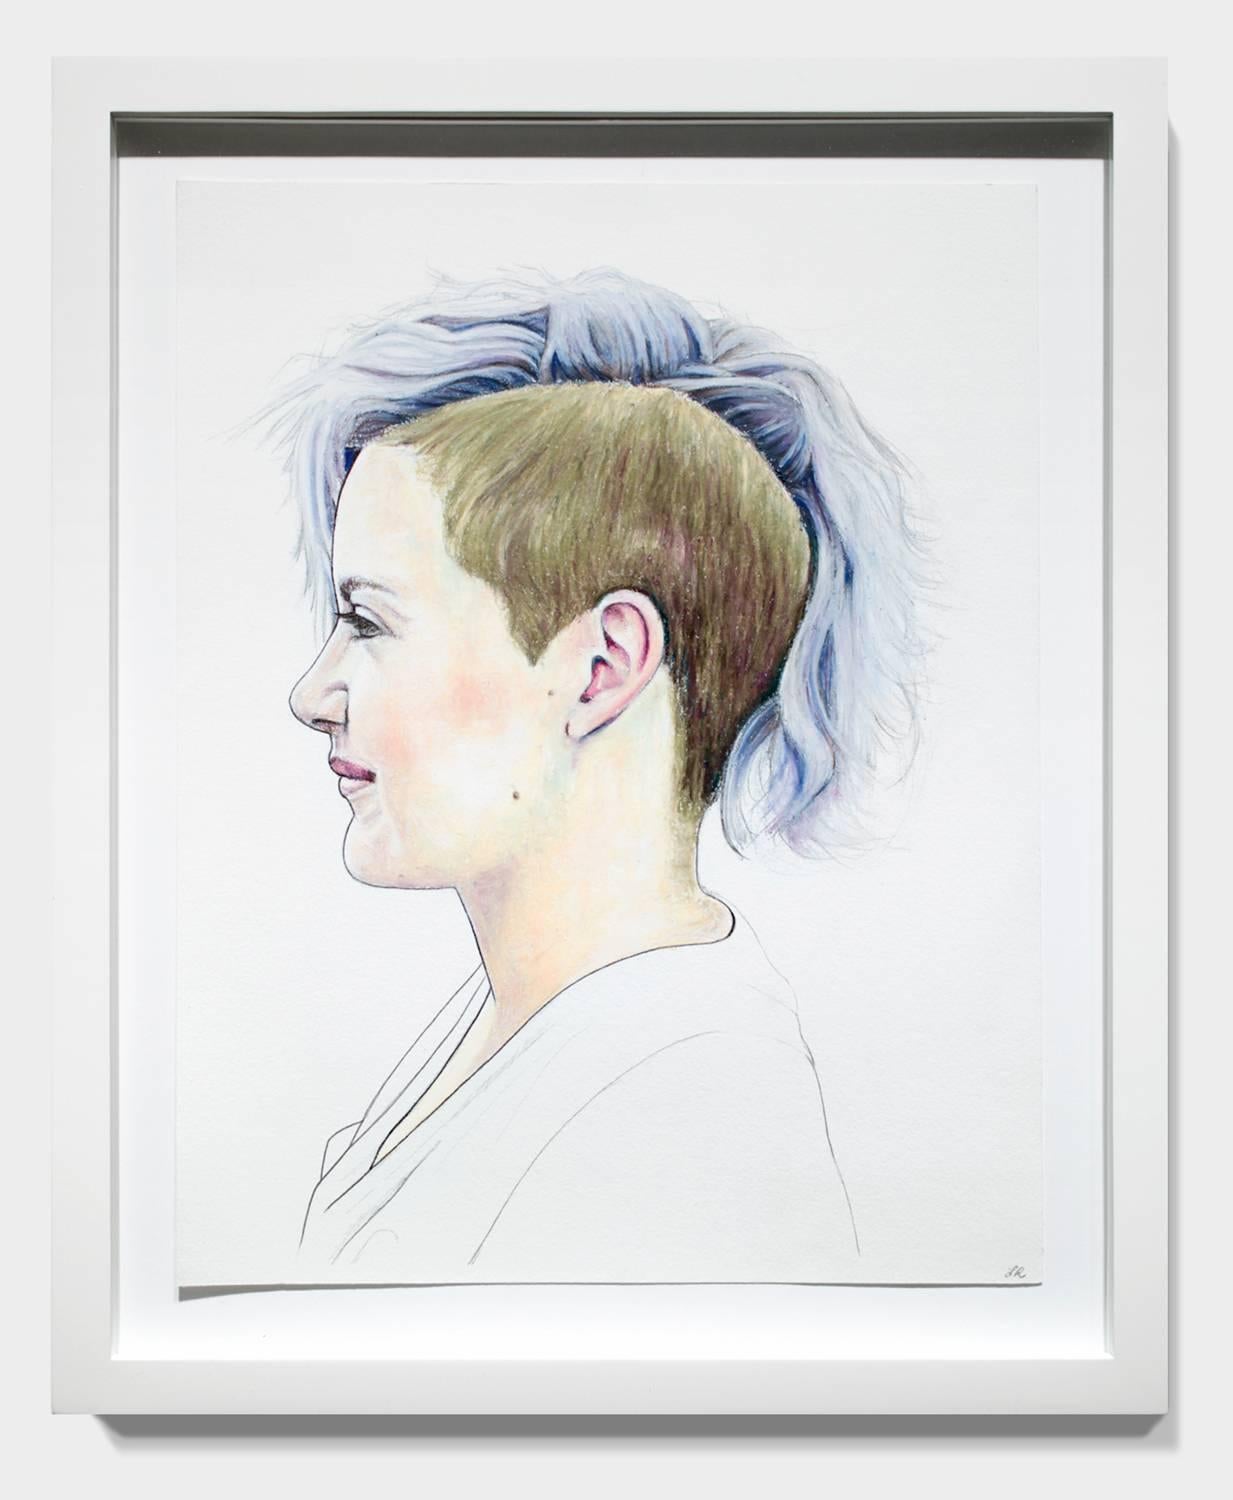 Original drawing by Lauren Rinaldi float mounted in the pictured simple white frame measuring 17in x 14in.

Lauren Rinaldi works using unbiased portraits of women’s bodies as a vehicle to explore ideas about body image, sexuality and self-identity